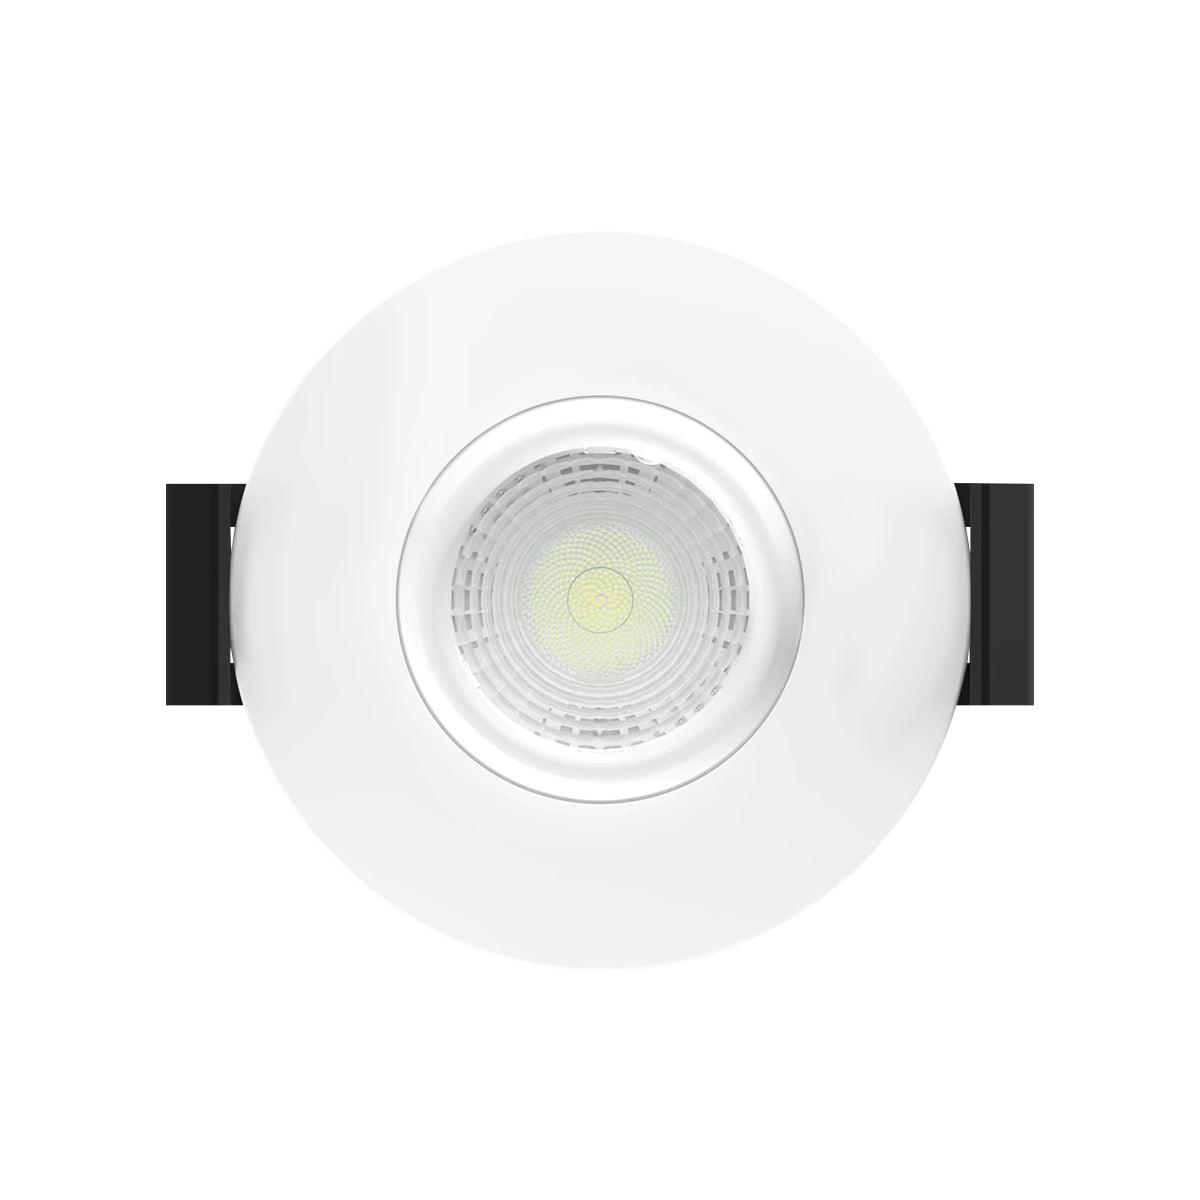 2 inch Gimbal LED Canless Recessed Light, 6 Watt, 400 Lumens, Selectable CCT, 2700K to 5000K, 38 Degree Beam Angle